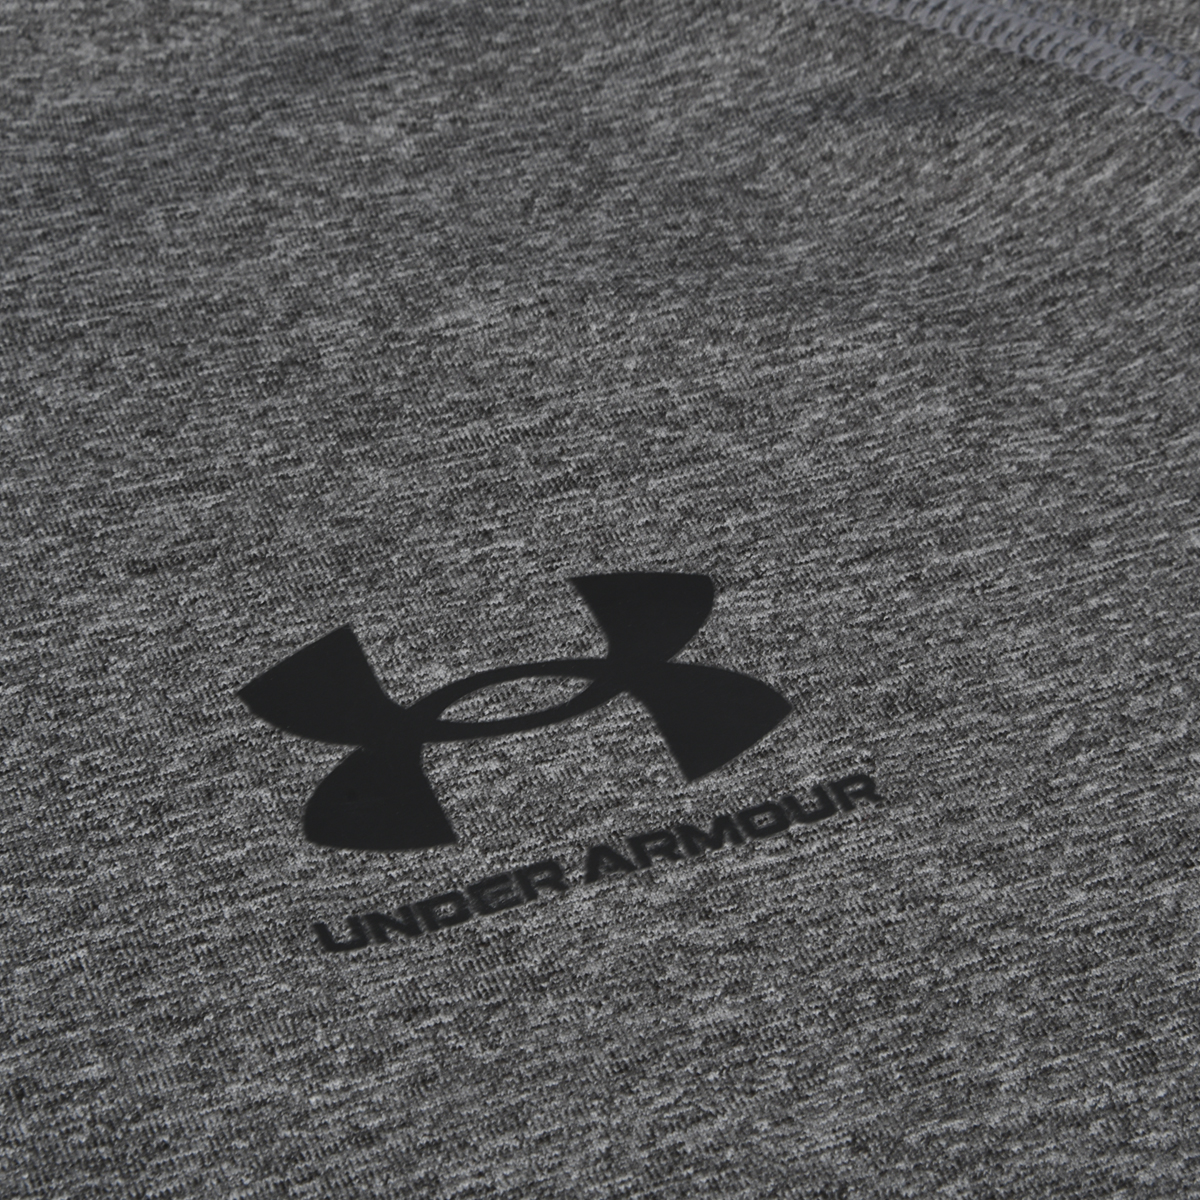 Remera Under Armour Heat Gear Comp,  image number null